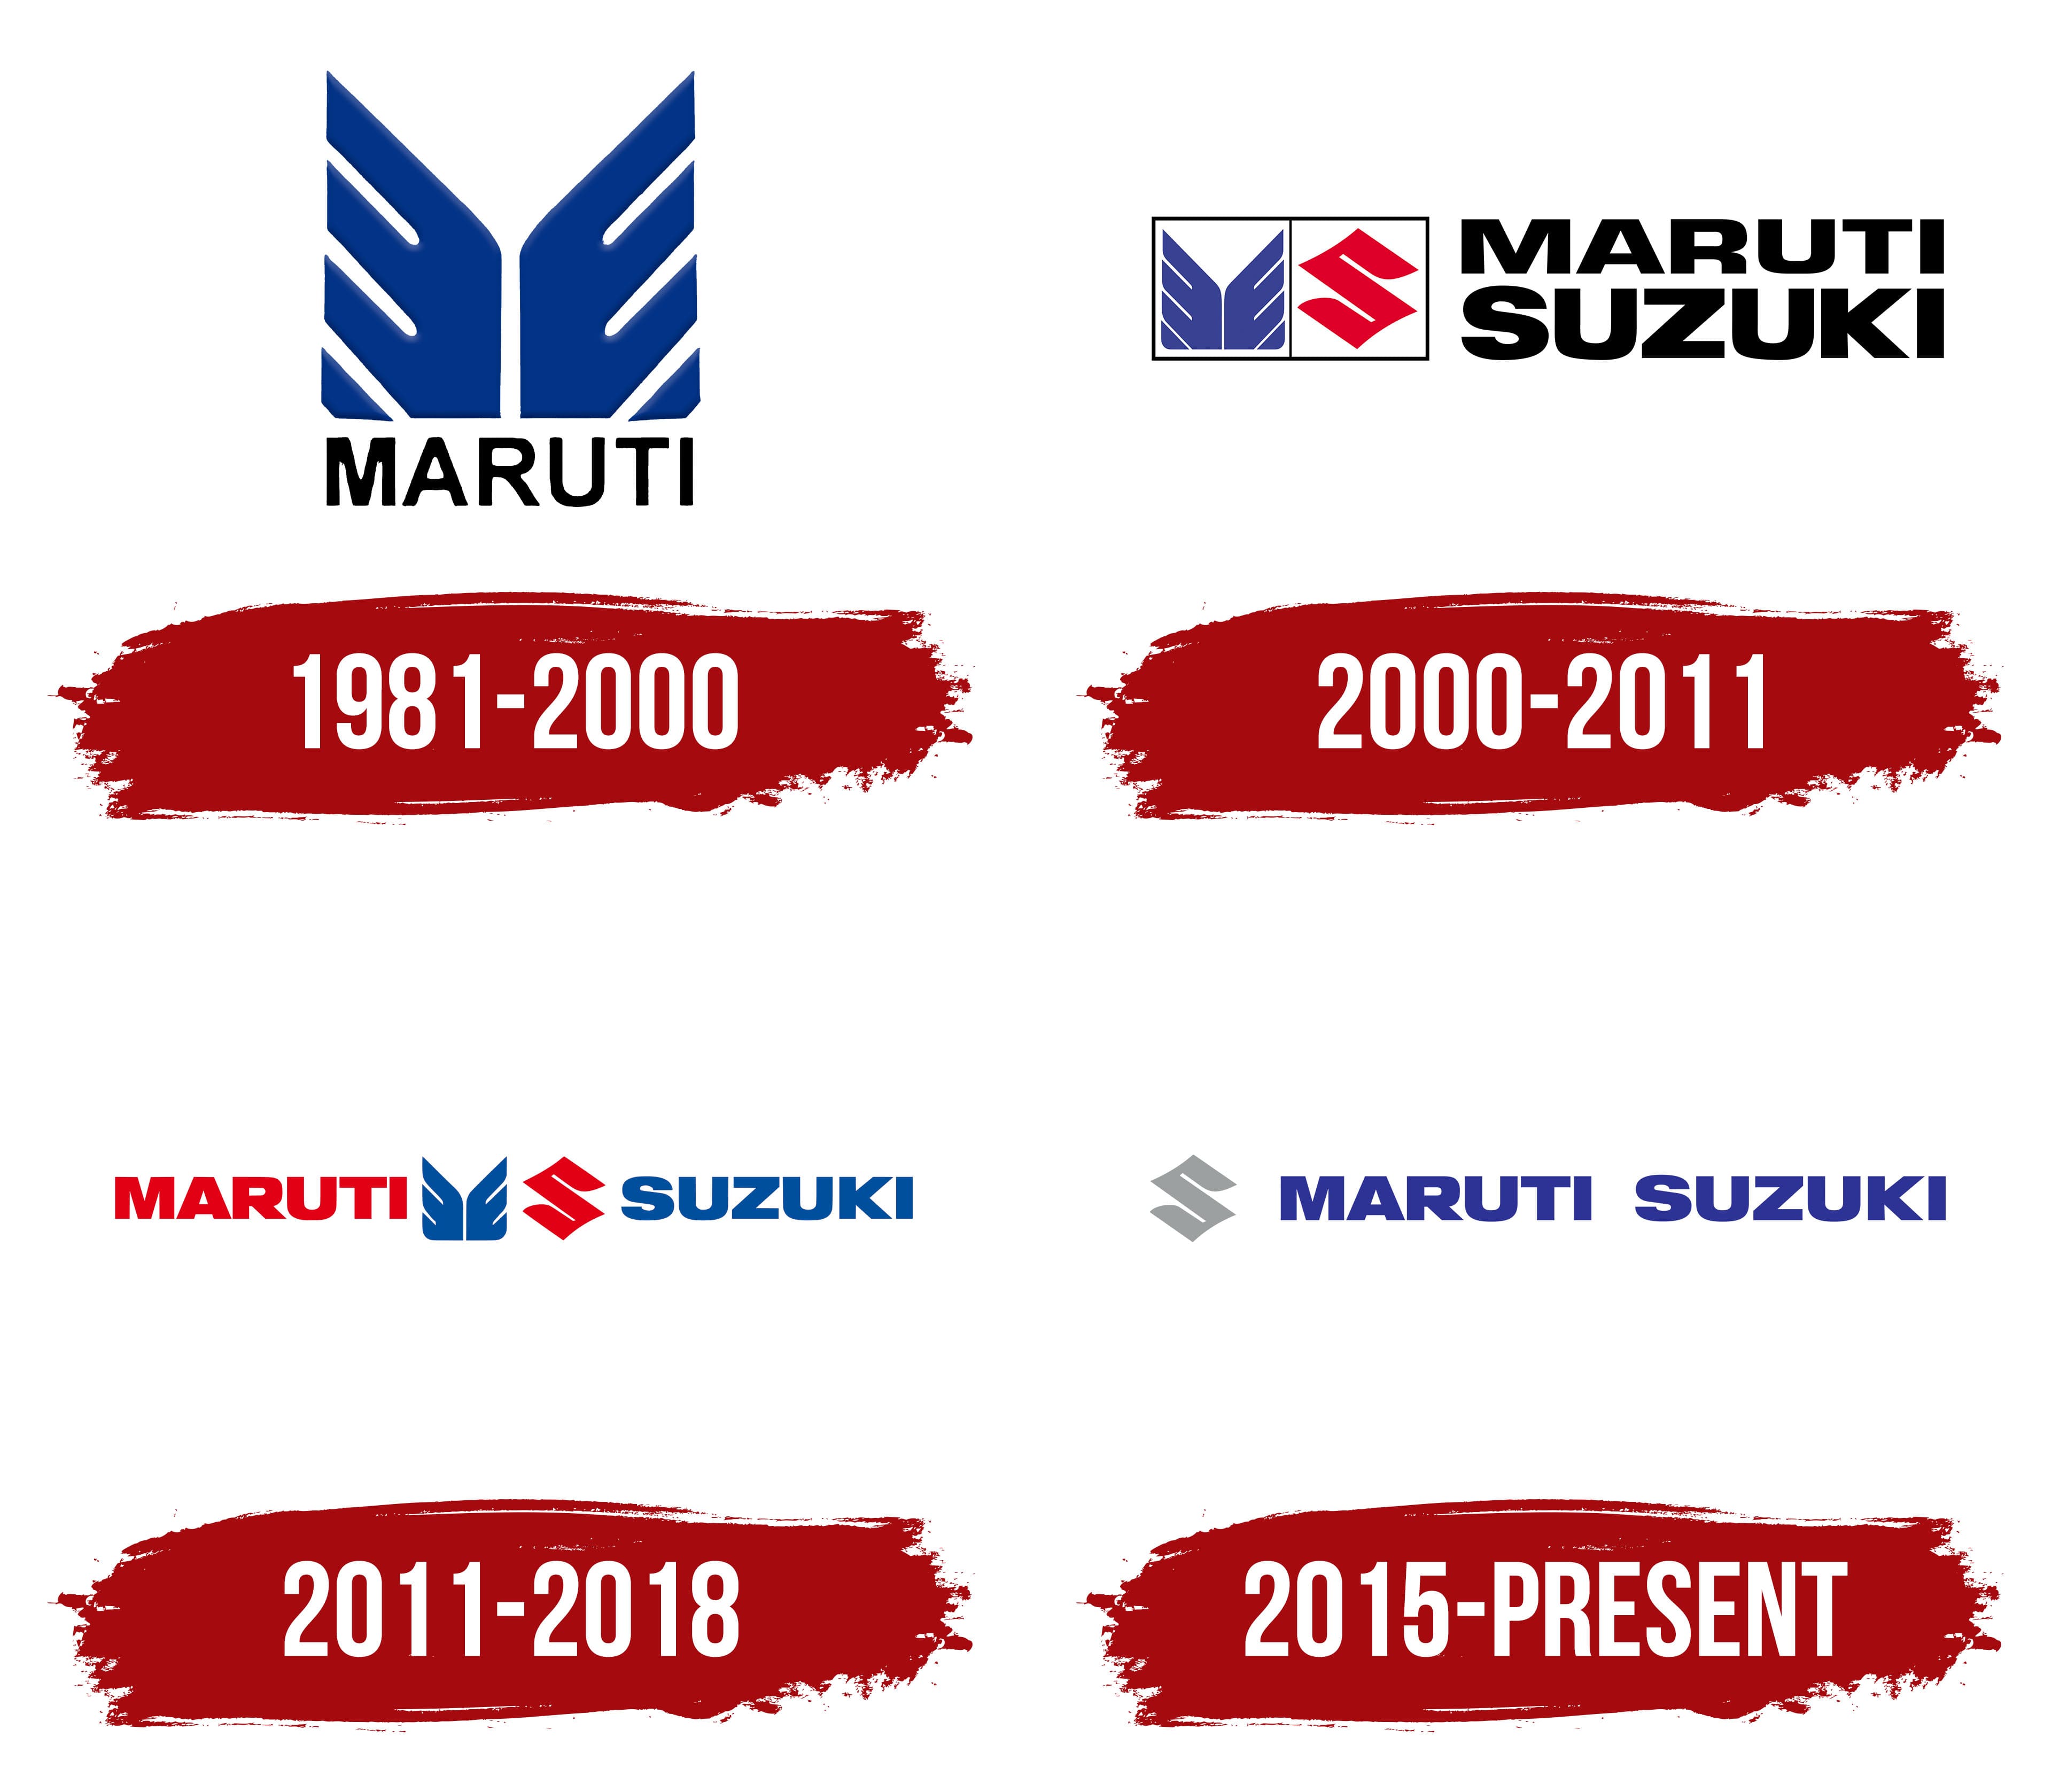 History of Suzuki and the Meaning of the Logo